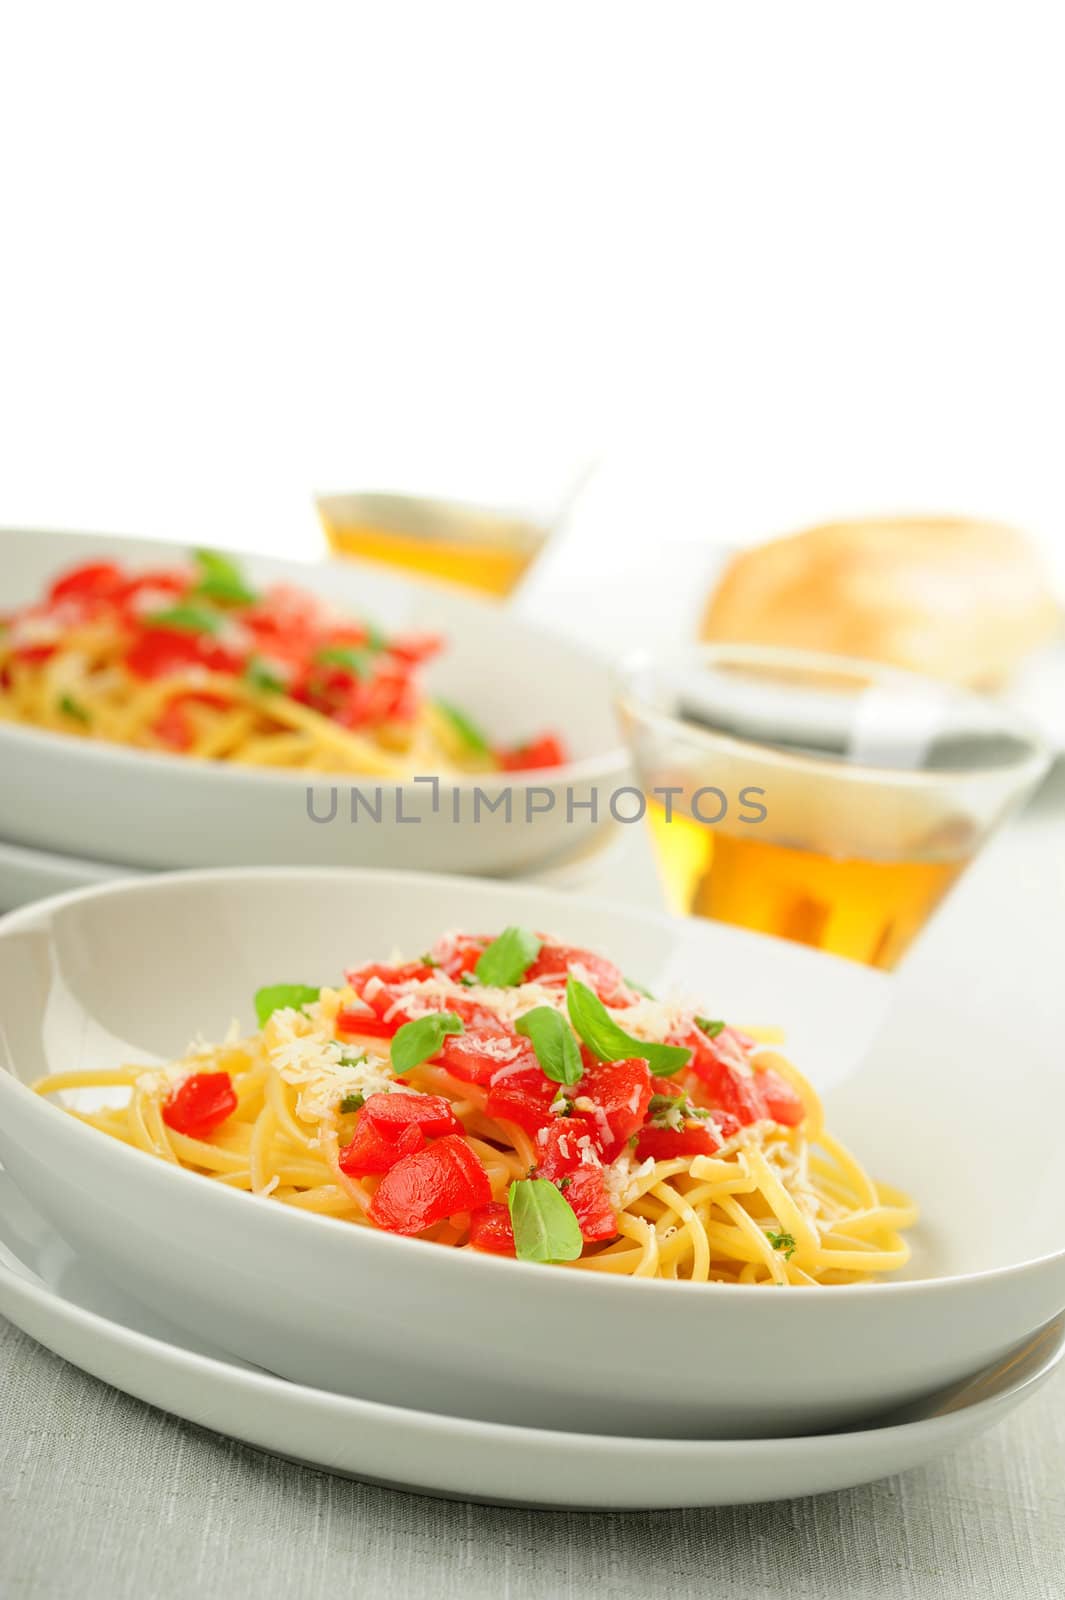 Linguini by billberryphotography